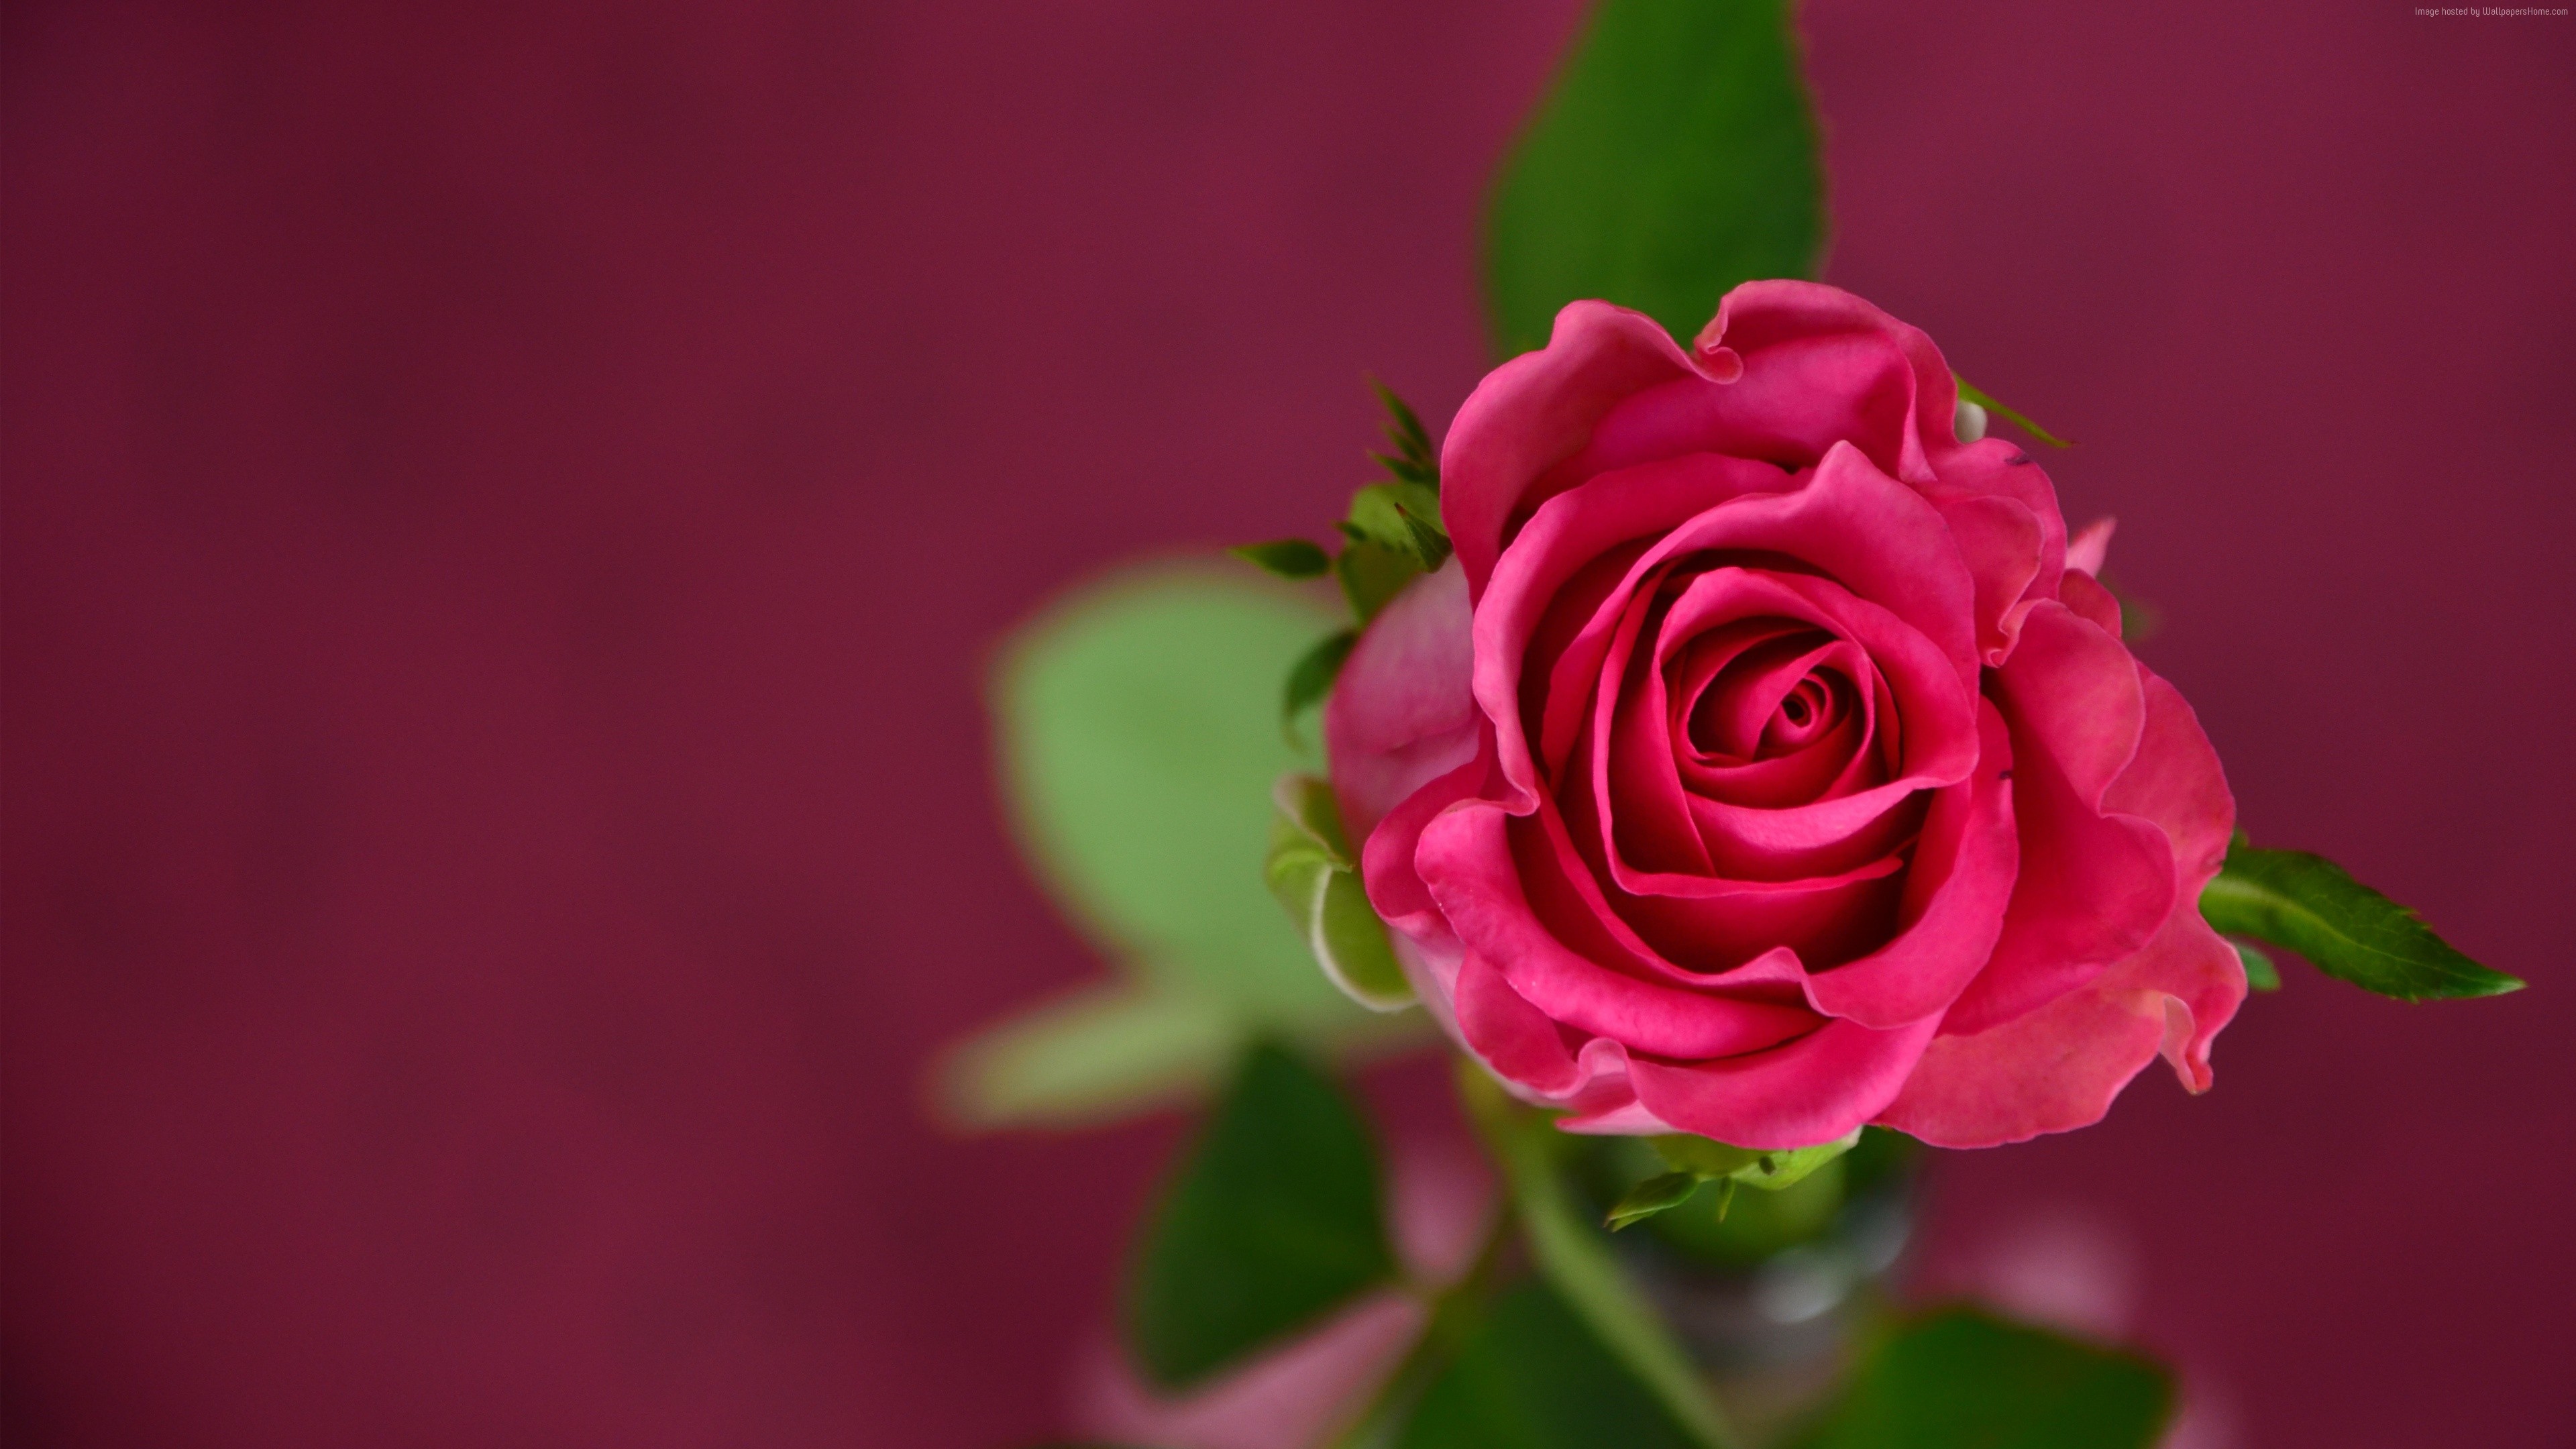 Rose 4k, HD Flowers, 4k Wallpapers, Images, Backgrounds, Photos and